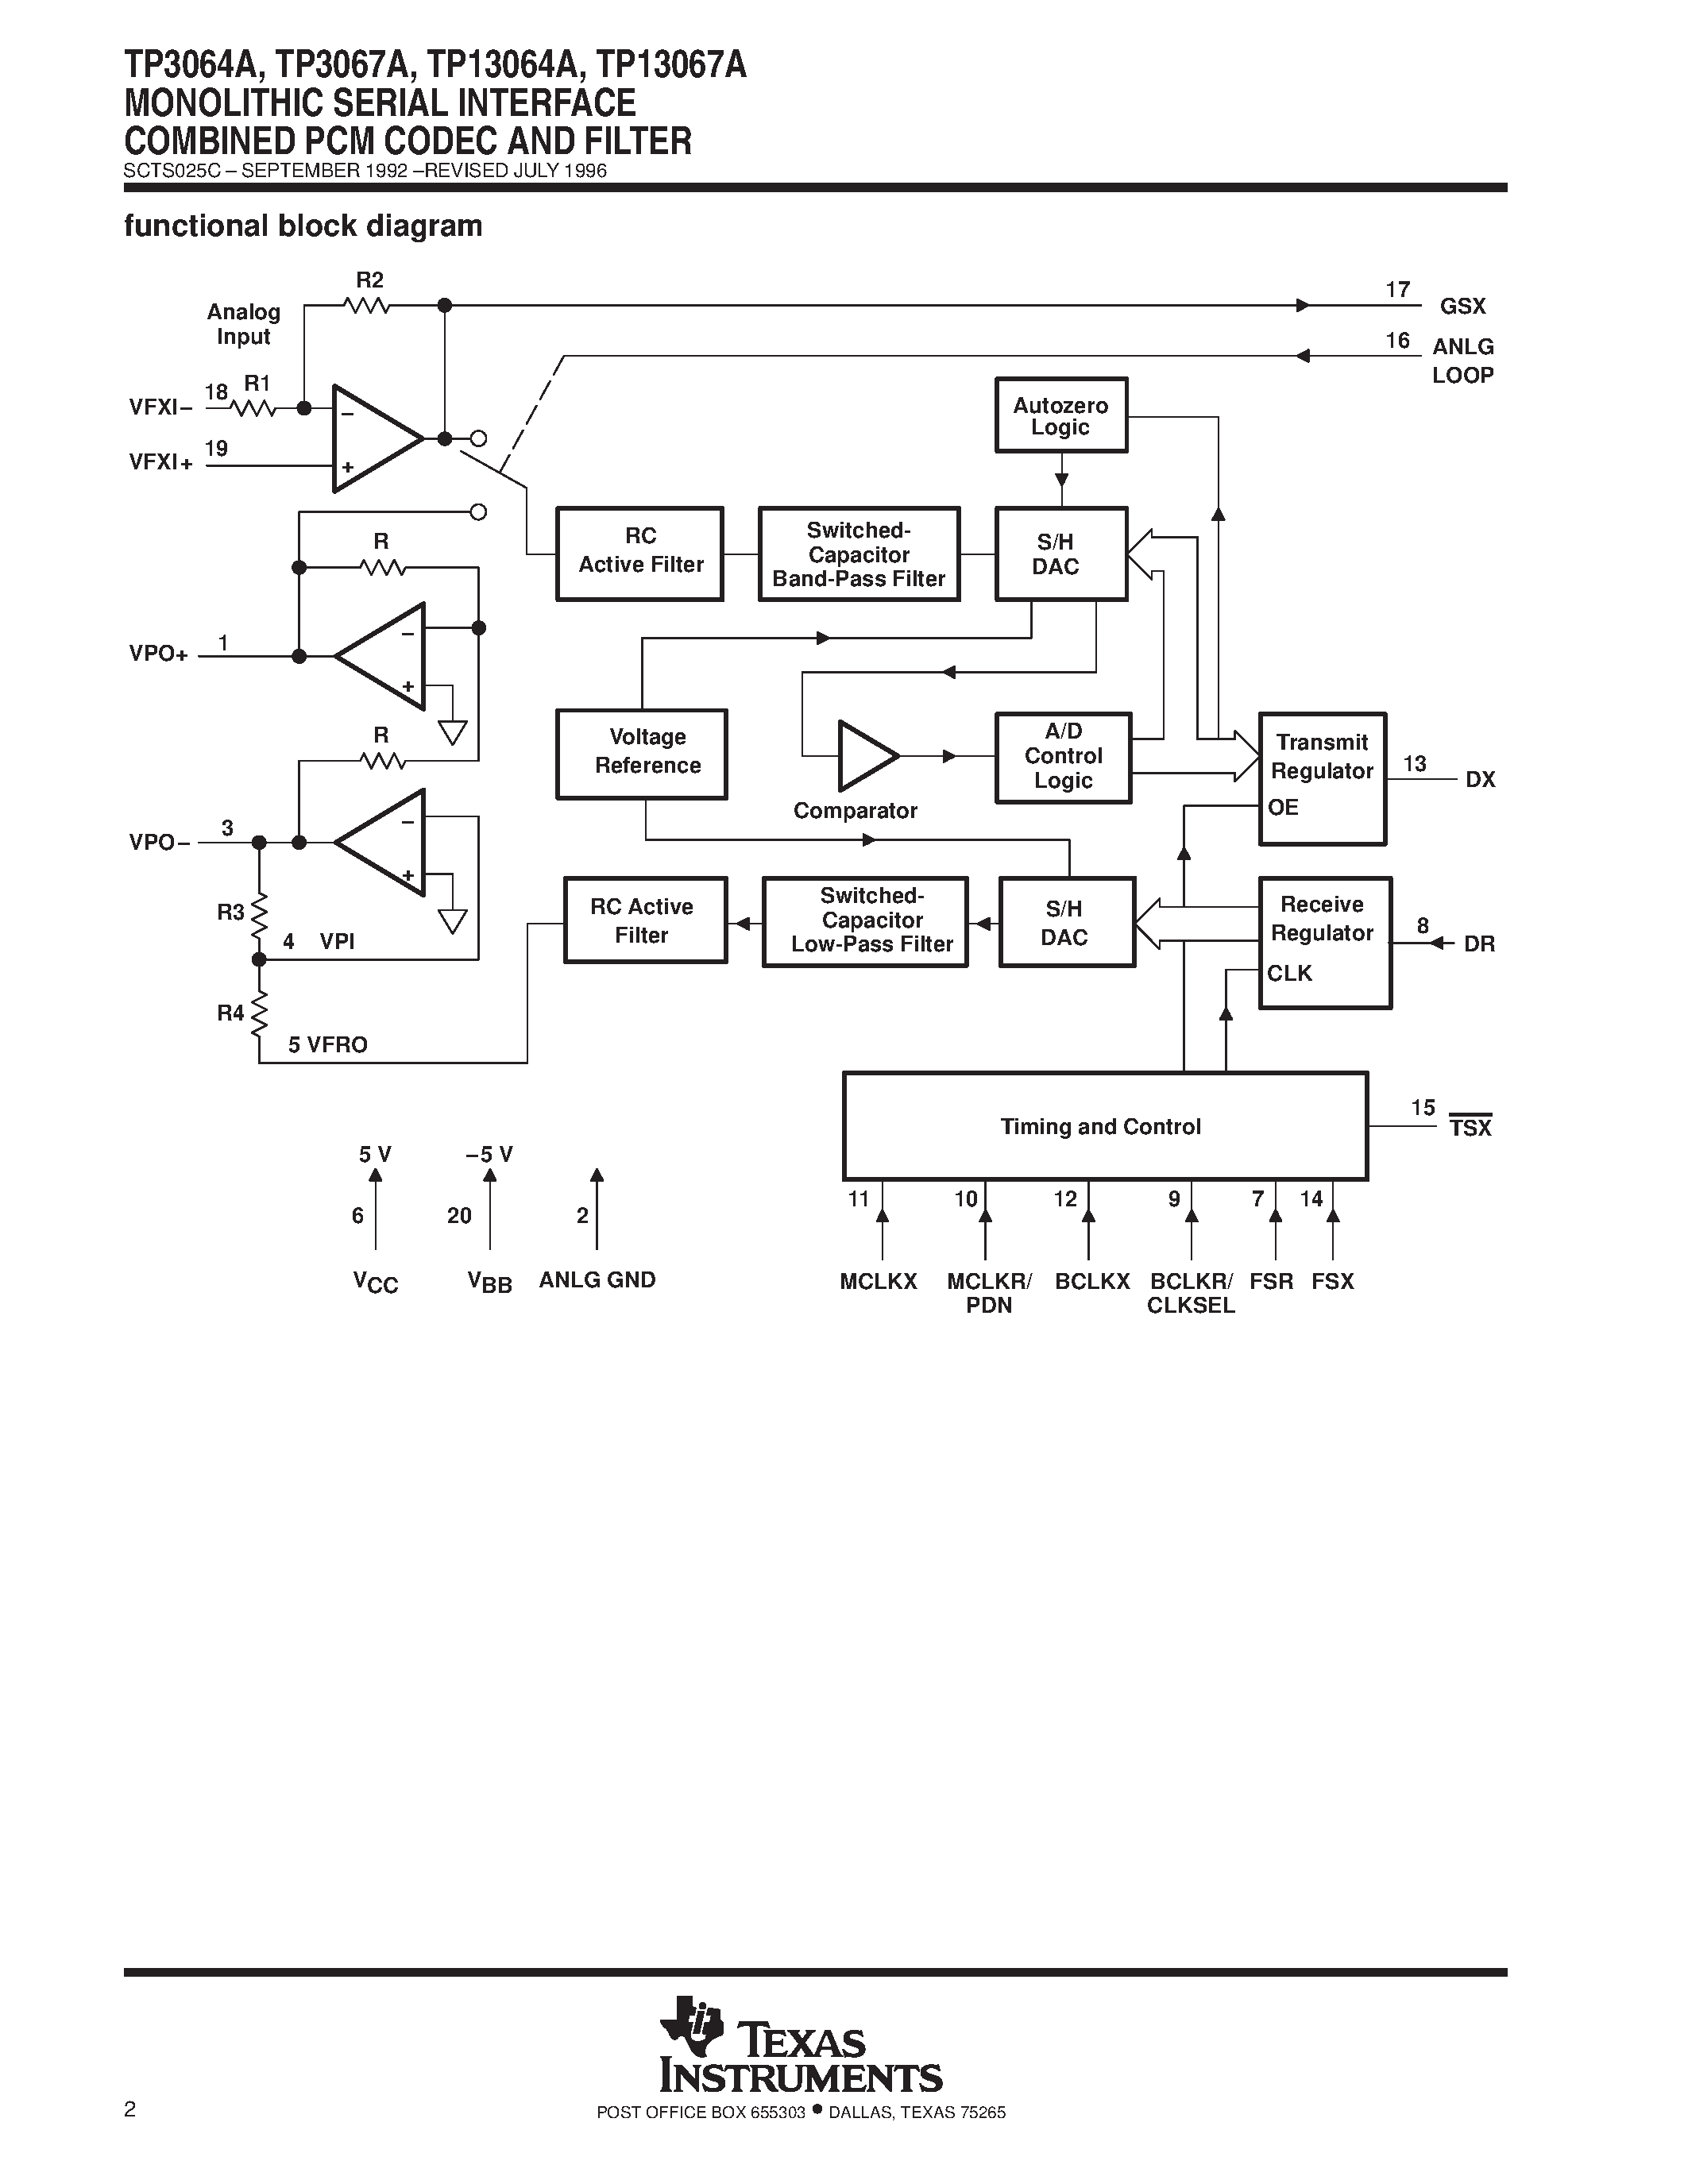 Datasheet TP13067AN - MONOLITHIC SERIAL INTERFACE COMBINED PCM CODEC AND FILTER page 2